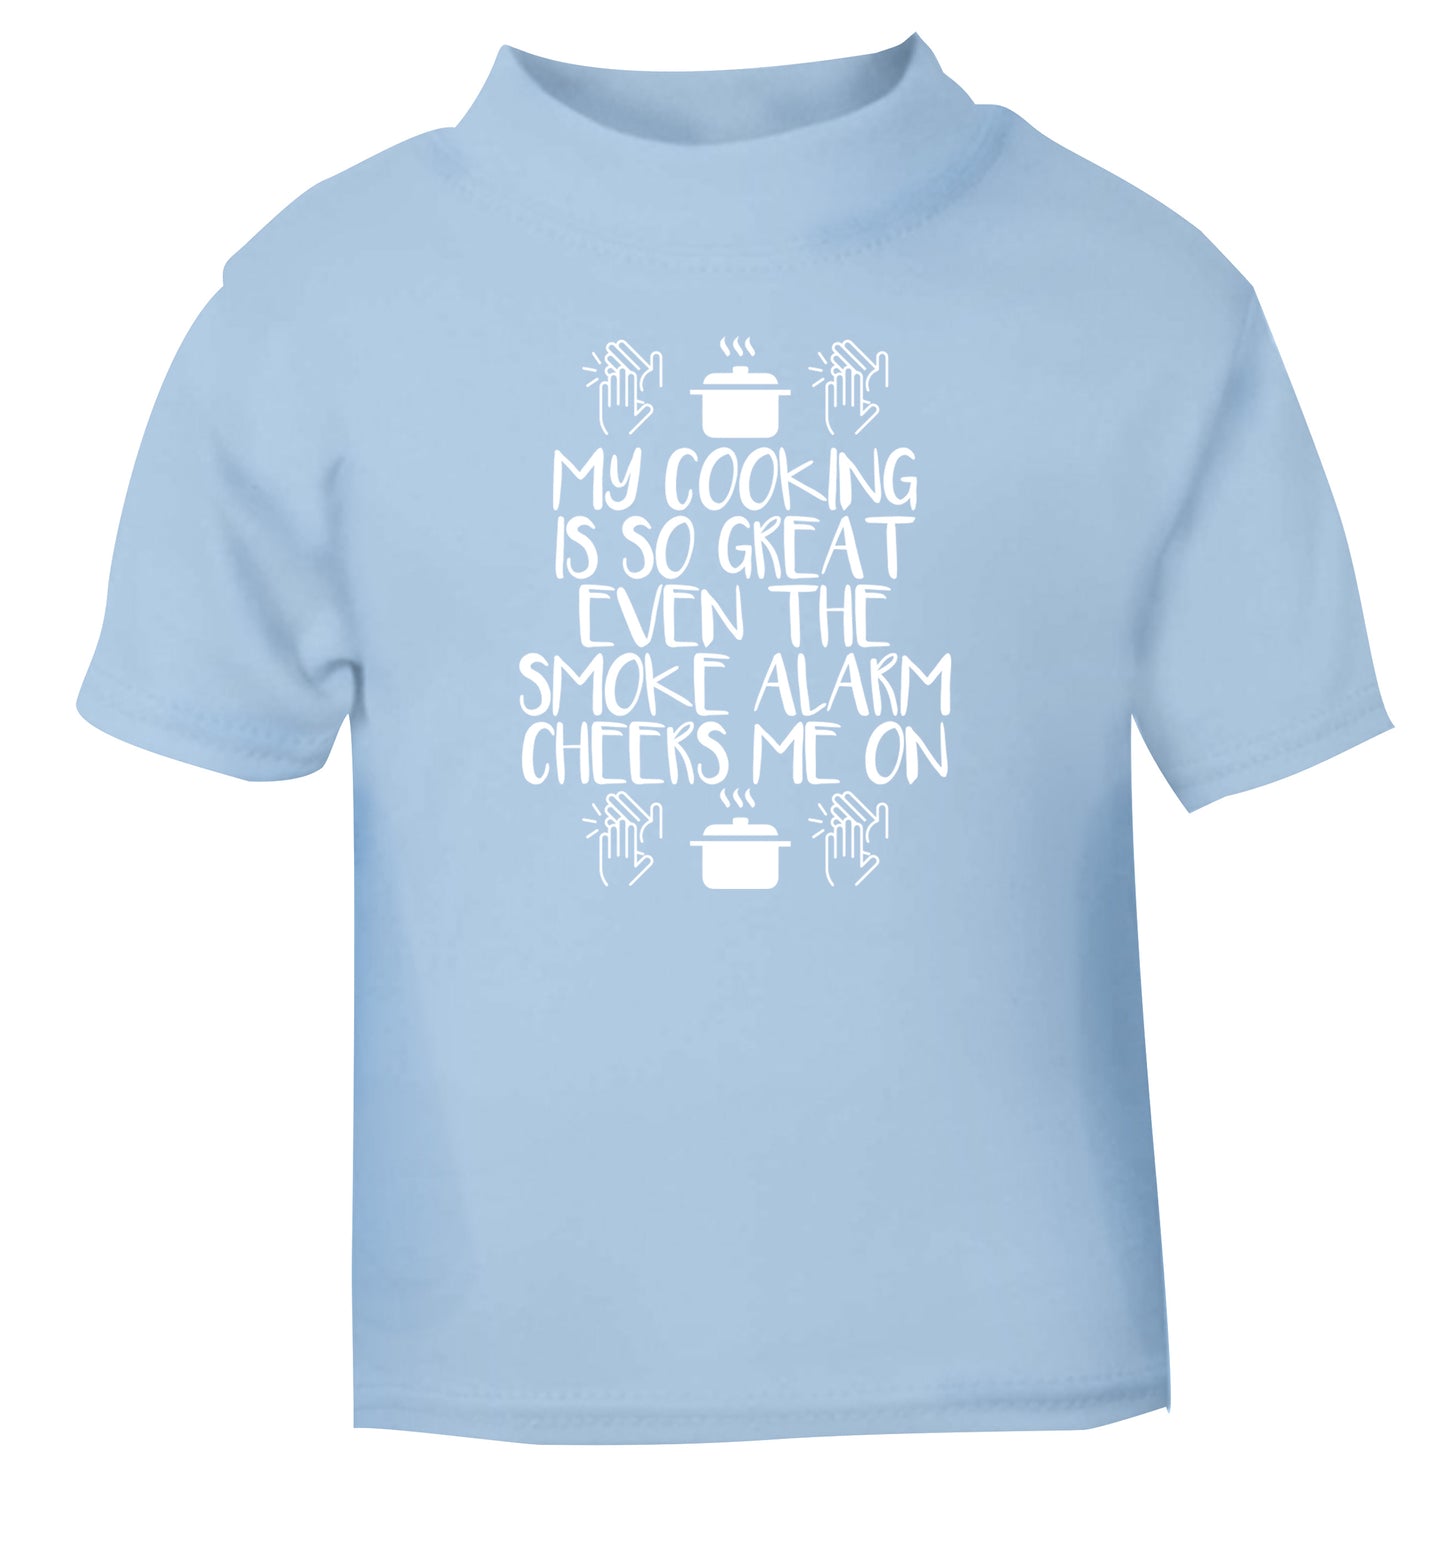 My cooking is so great even the smoke alarm cheers me on! light blue Baby Toddler Tshirt 2 Years